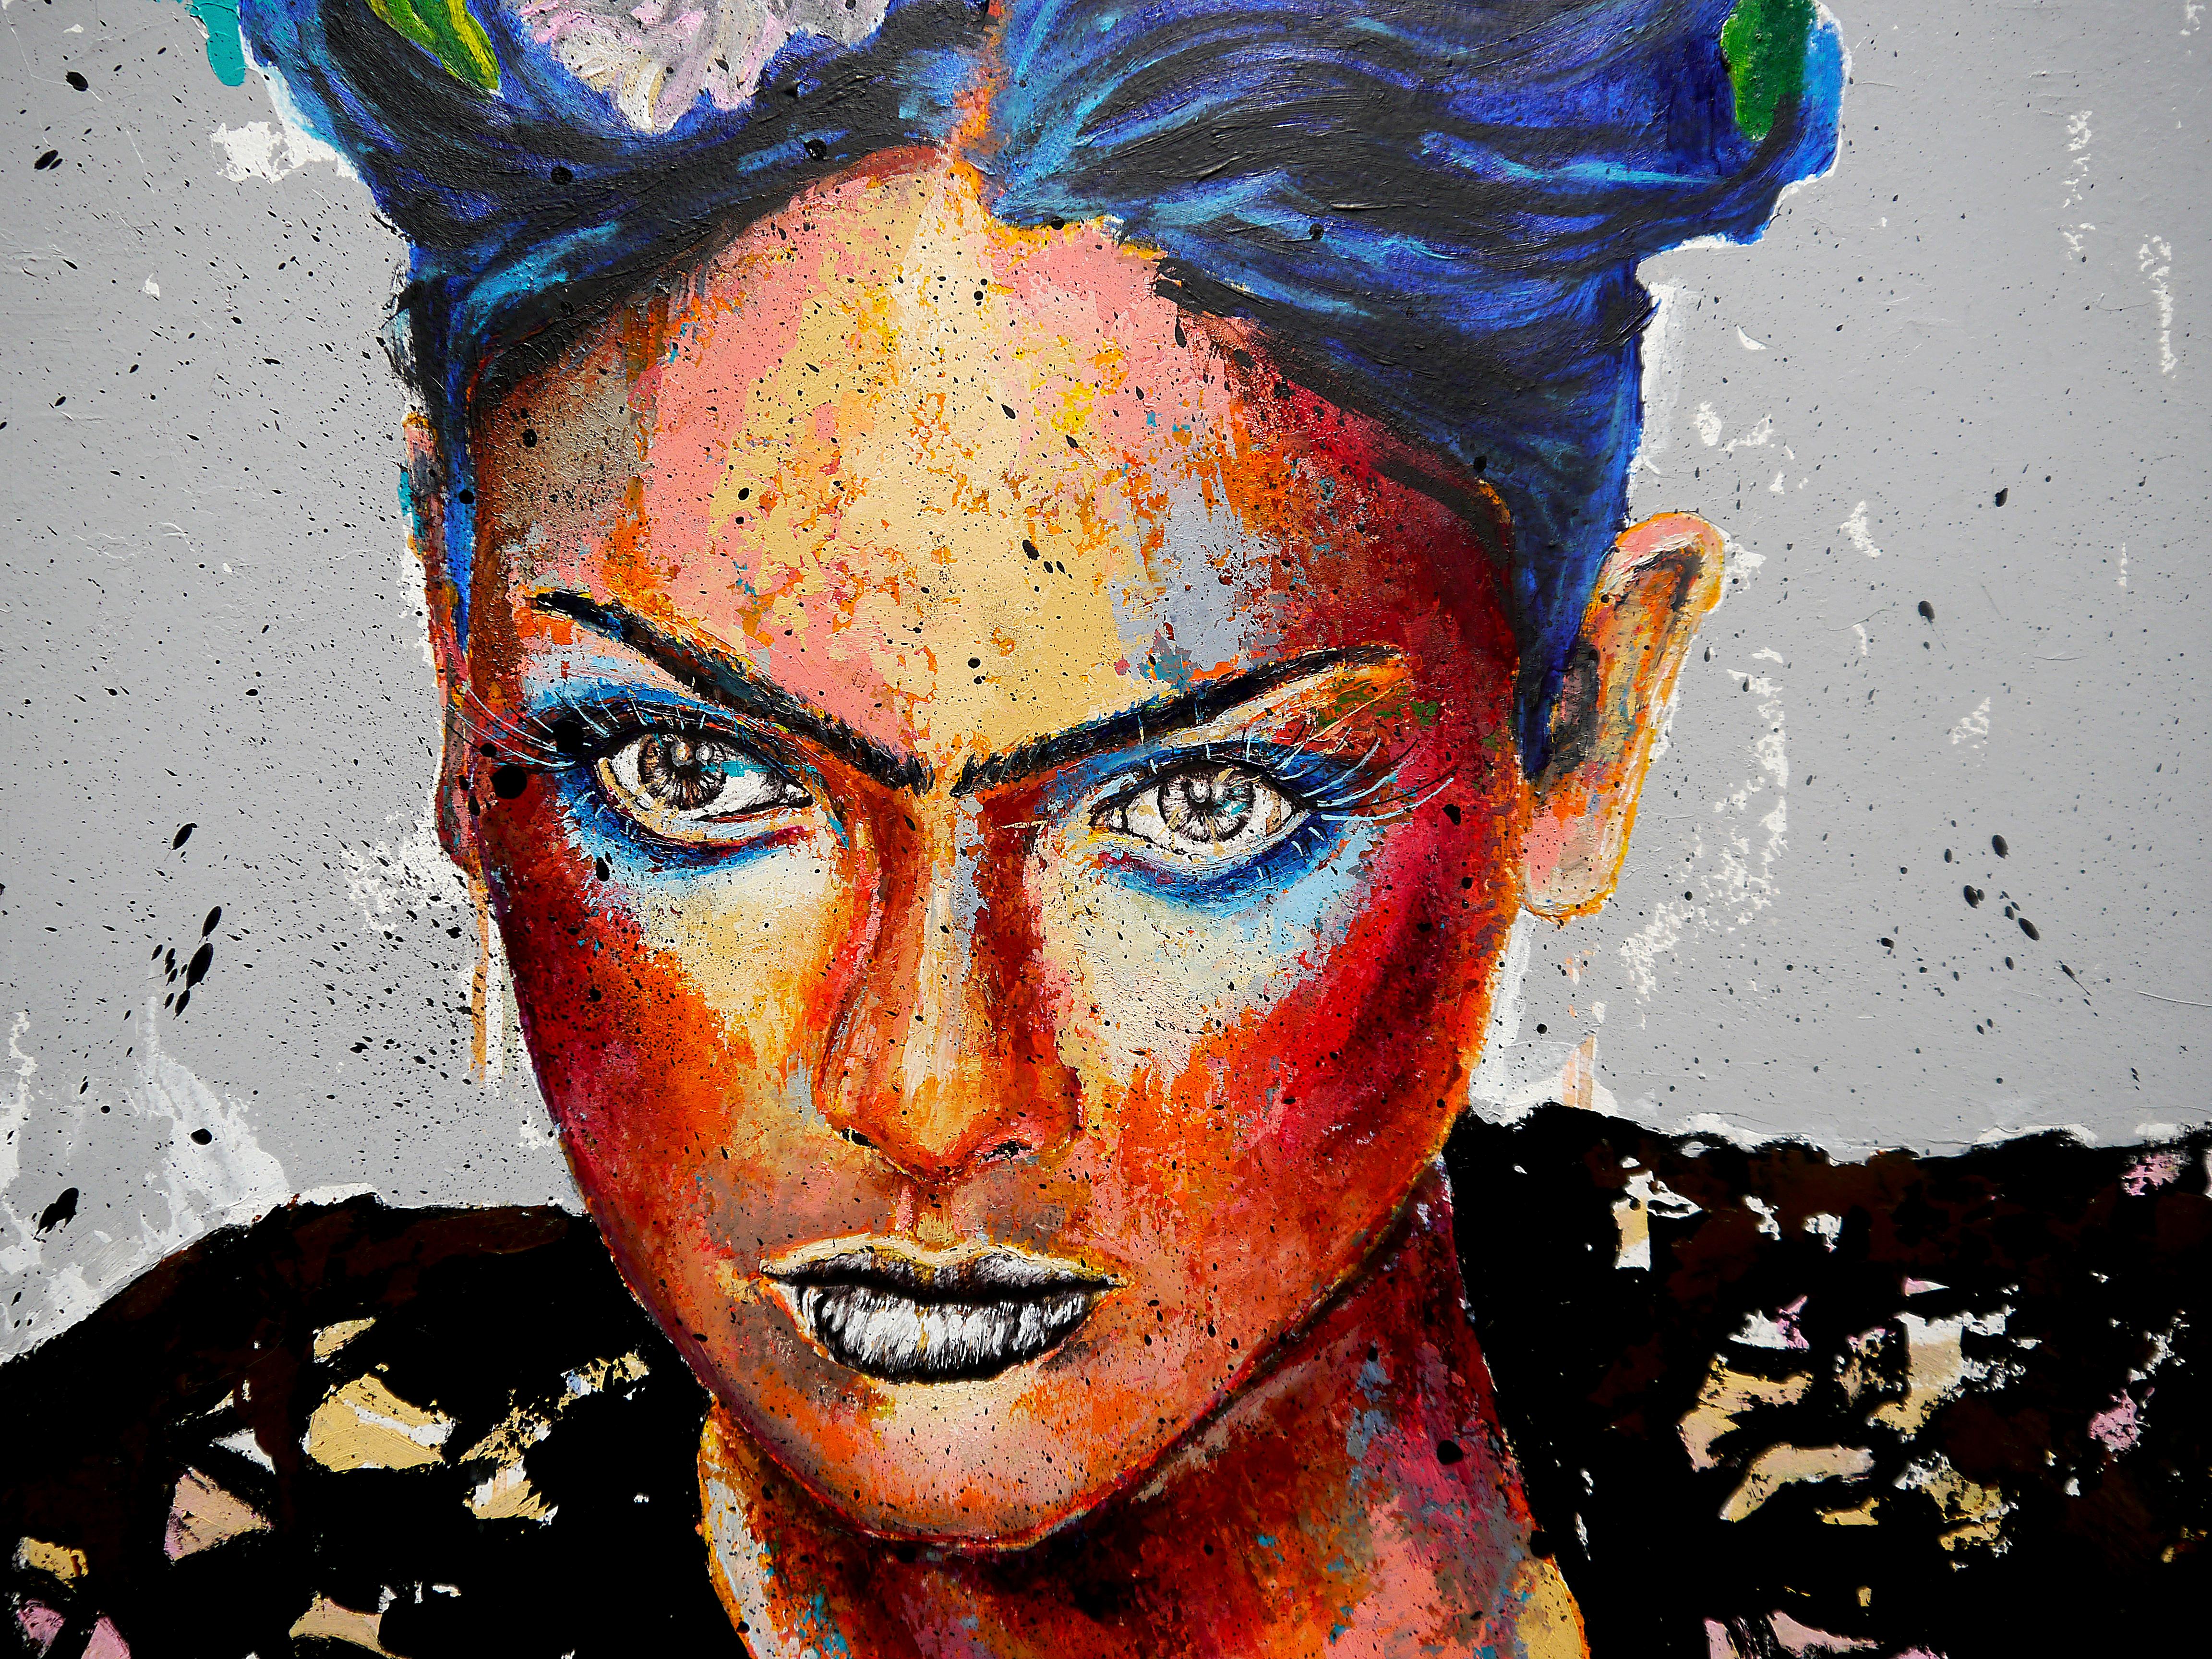 Portrait 22 PS 19 Frida on Fire

Portrait of the artist Frida Kahlo with Blue Hair

Technique: oil, acrylic, and ballpoint pen on paper mounted on wood 64 x 49cm (25,2x19,3 inch) with black frame 72x57cm (28,3x22,4inch)

Sustainability:  In an